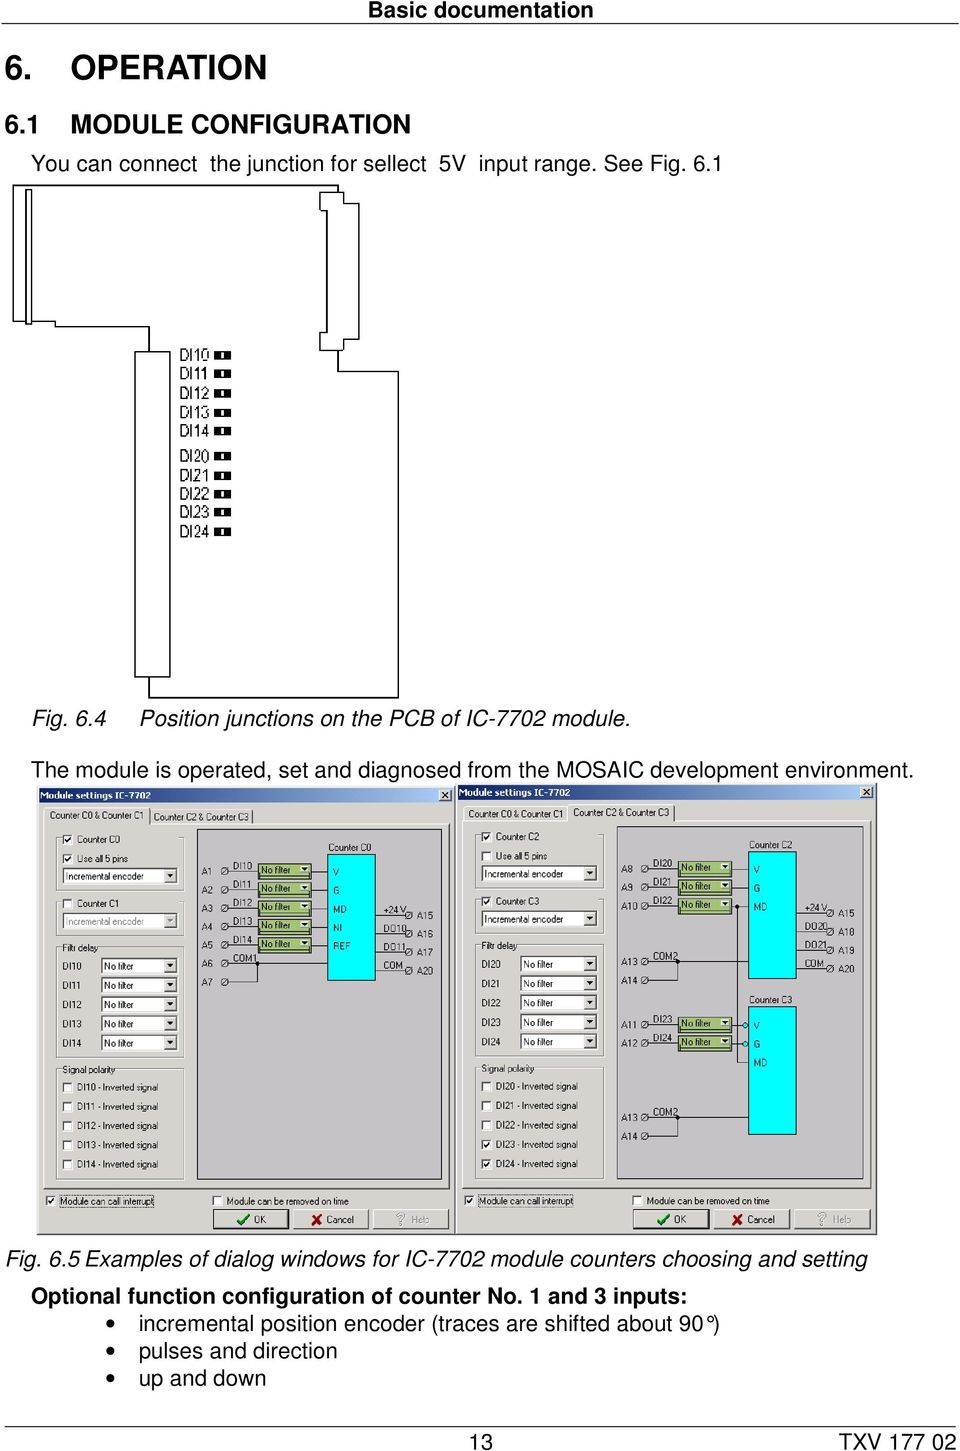 The module is operated, set and diagnosed from the MOSAIC development environment. Fig. 6.